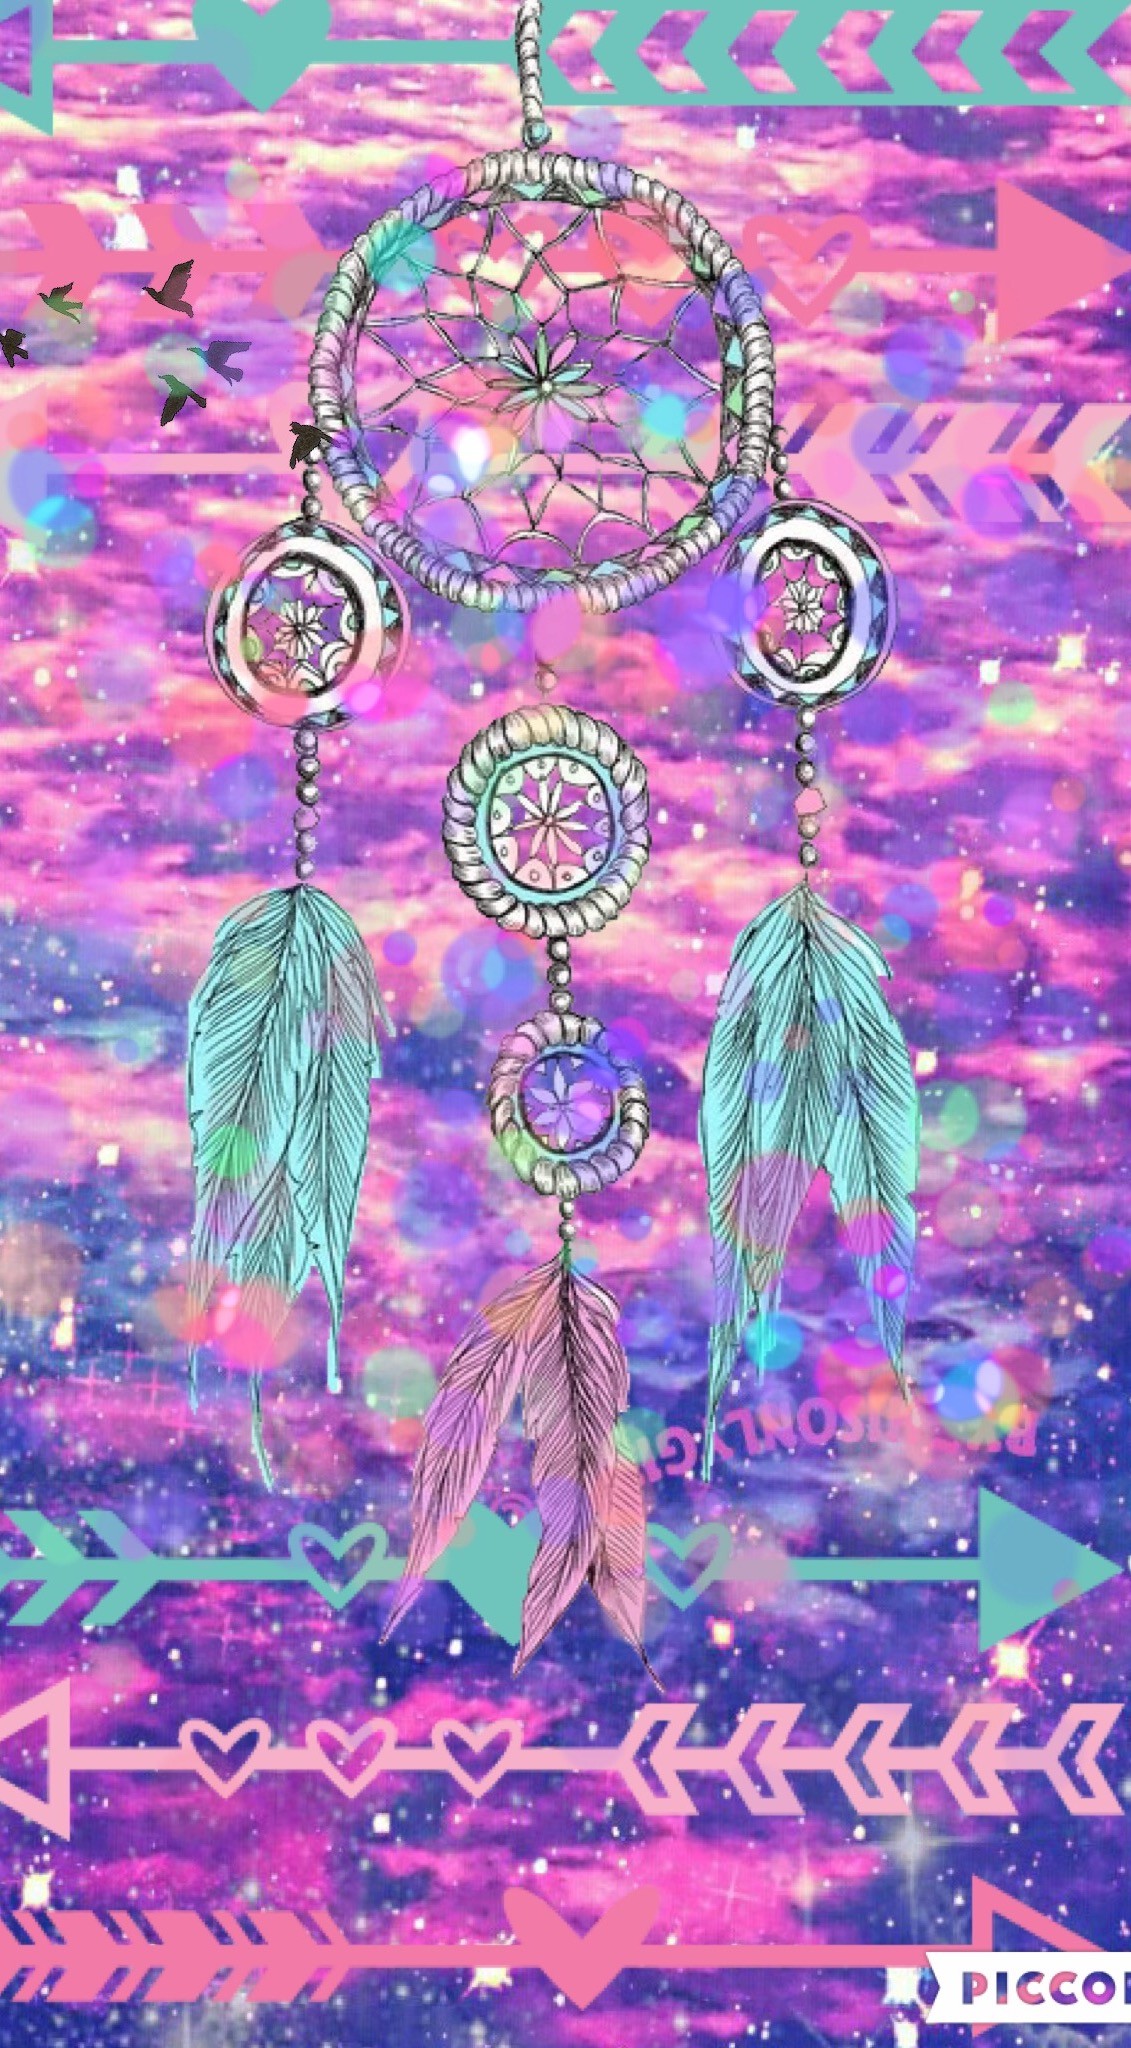 Dream catcher girly by Rose. Phone BackgroundsPhone